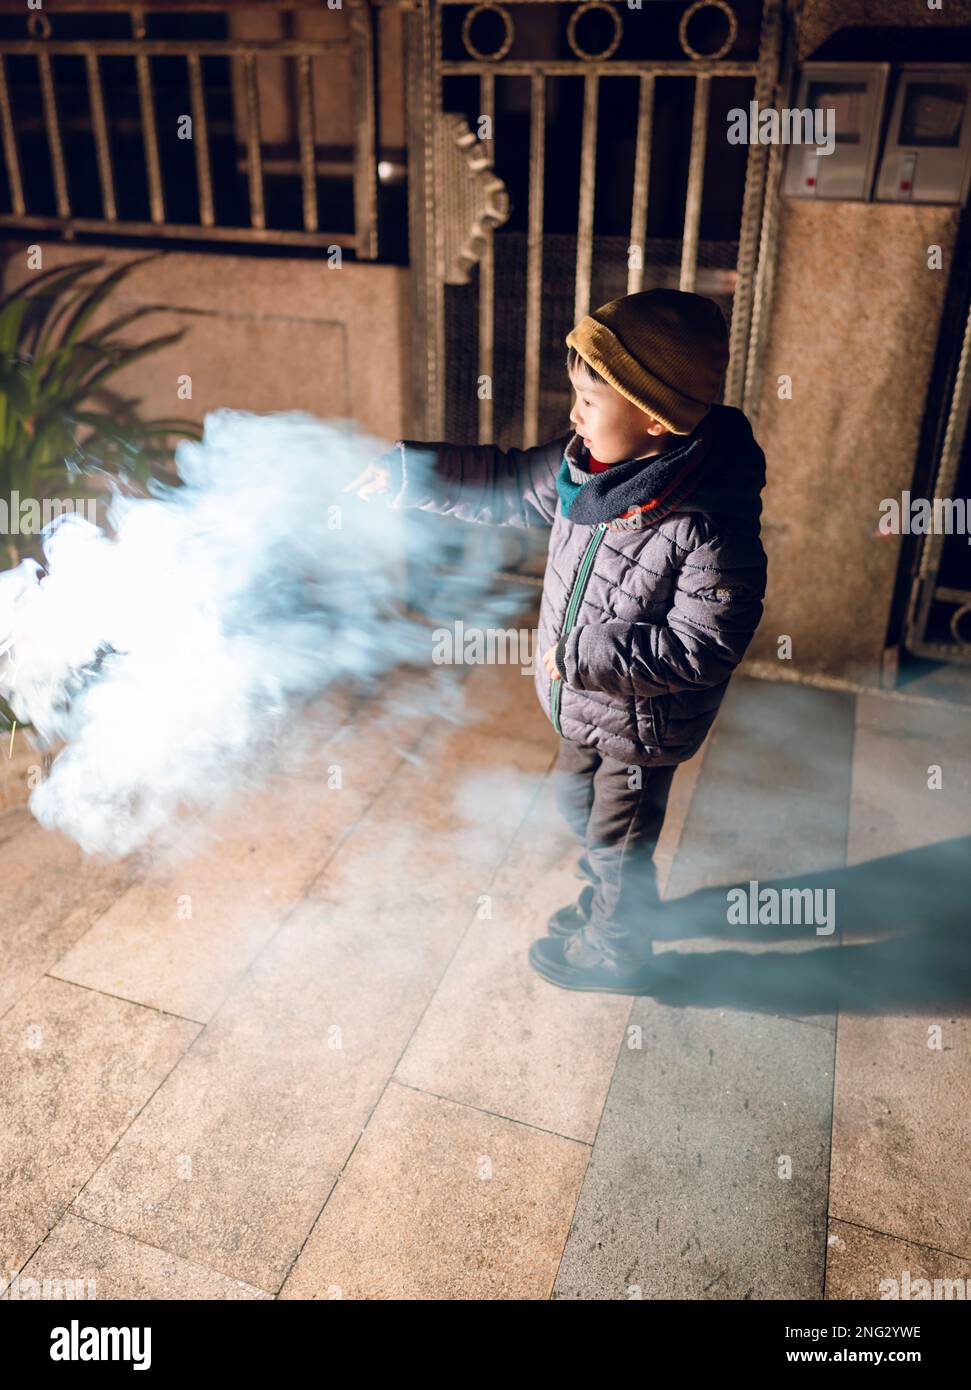 A young boy plays sparklers for the first time Stock Photo